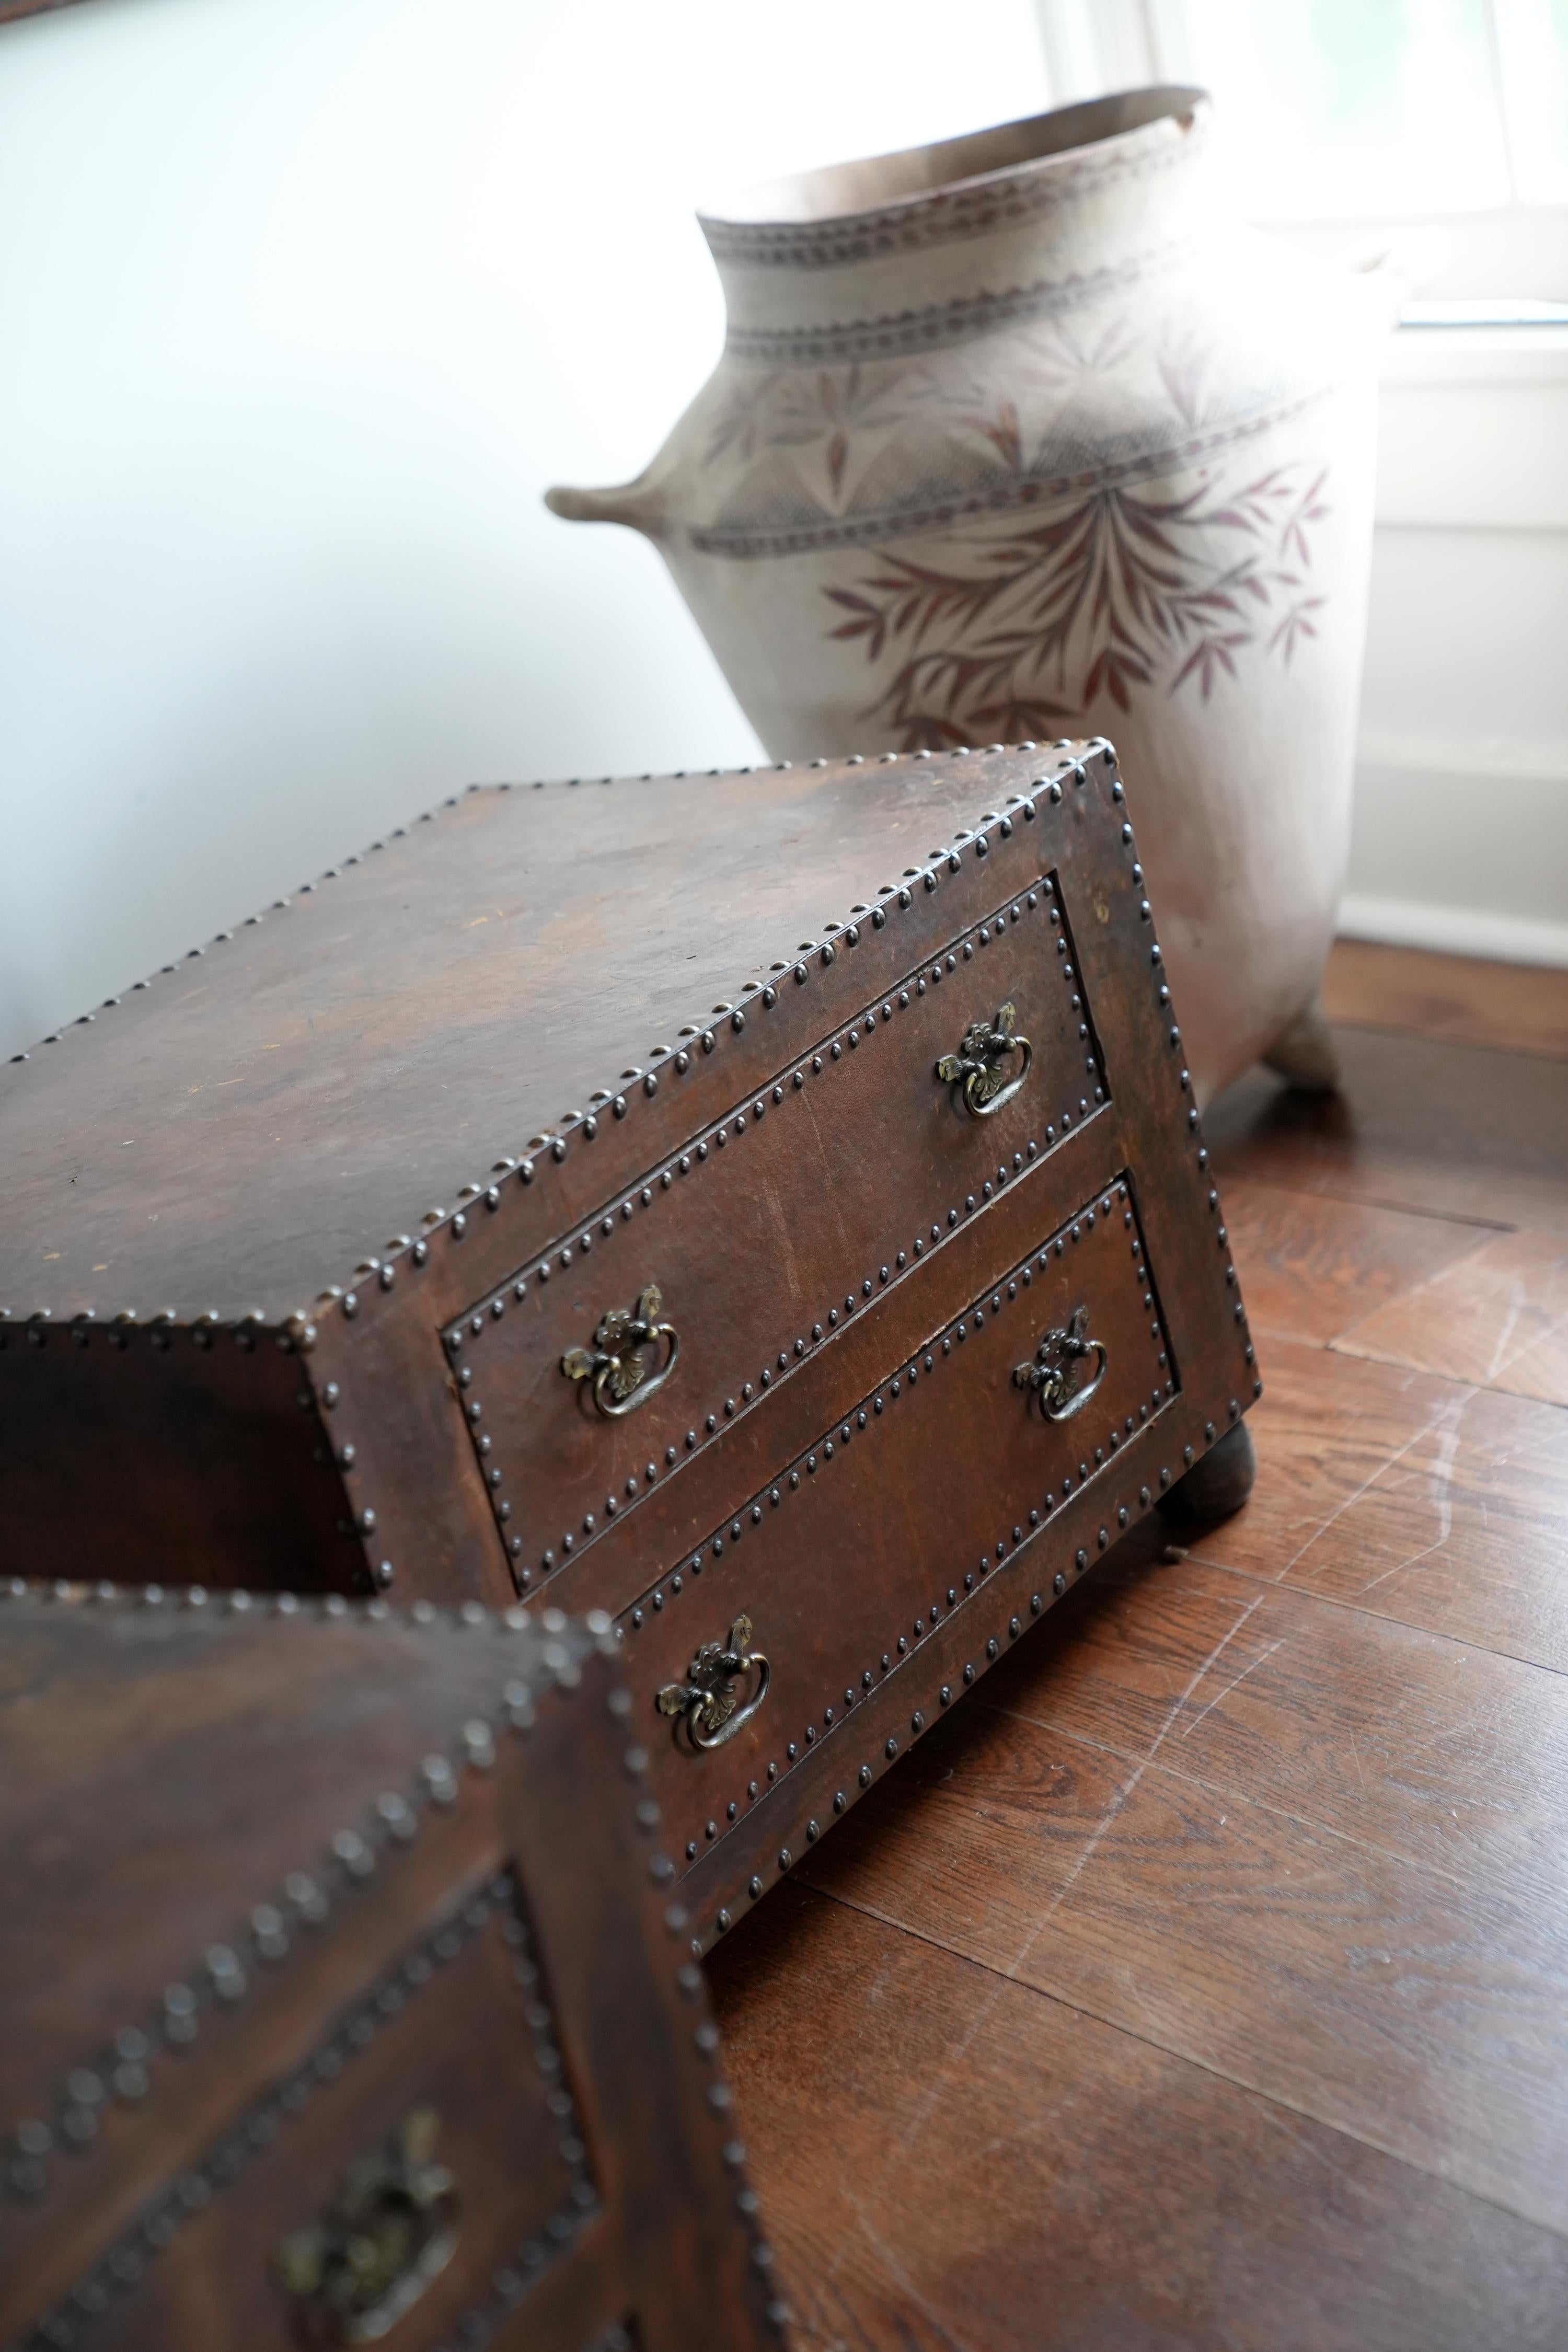 Studded leather clad chests 1